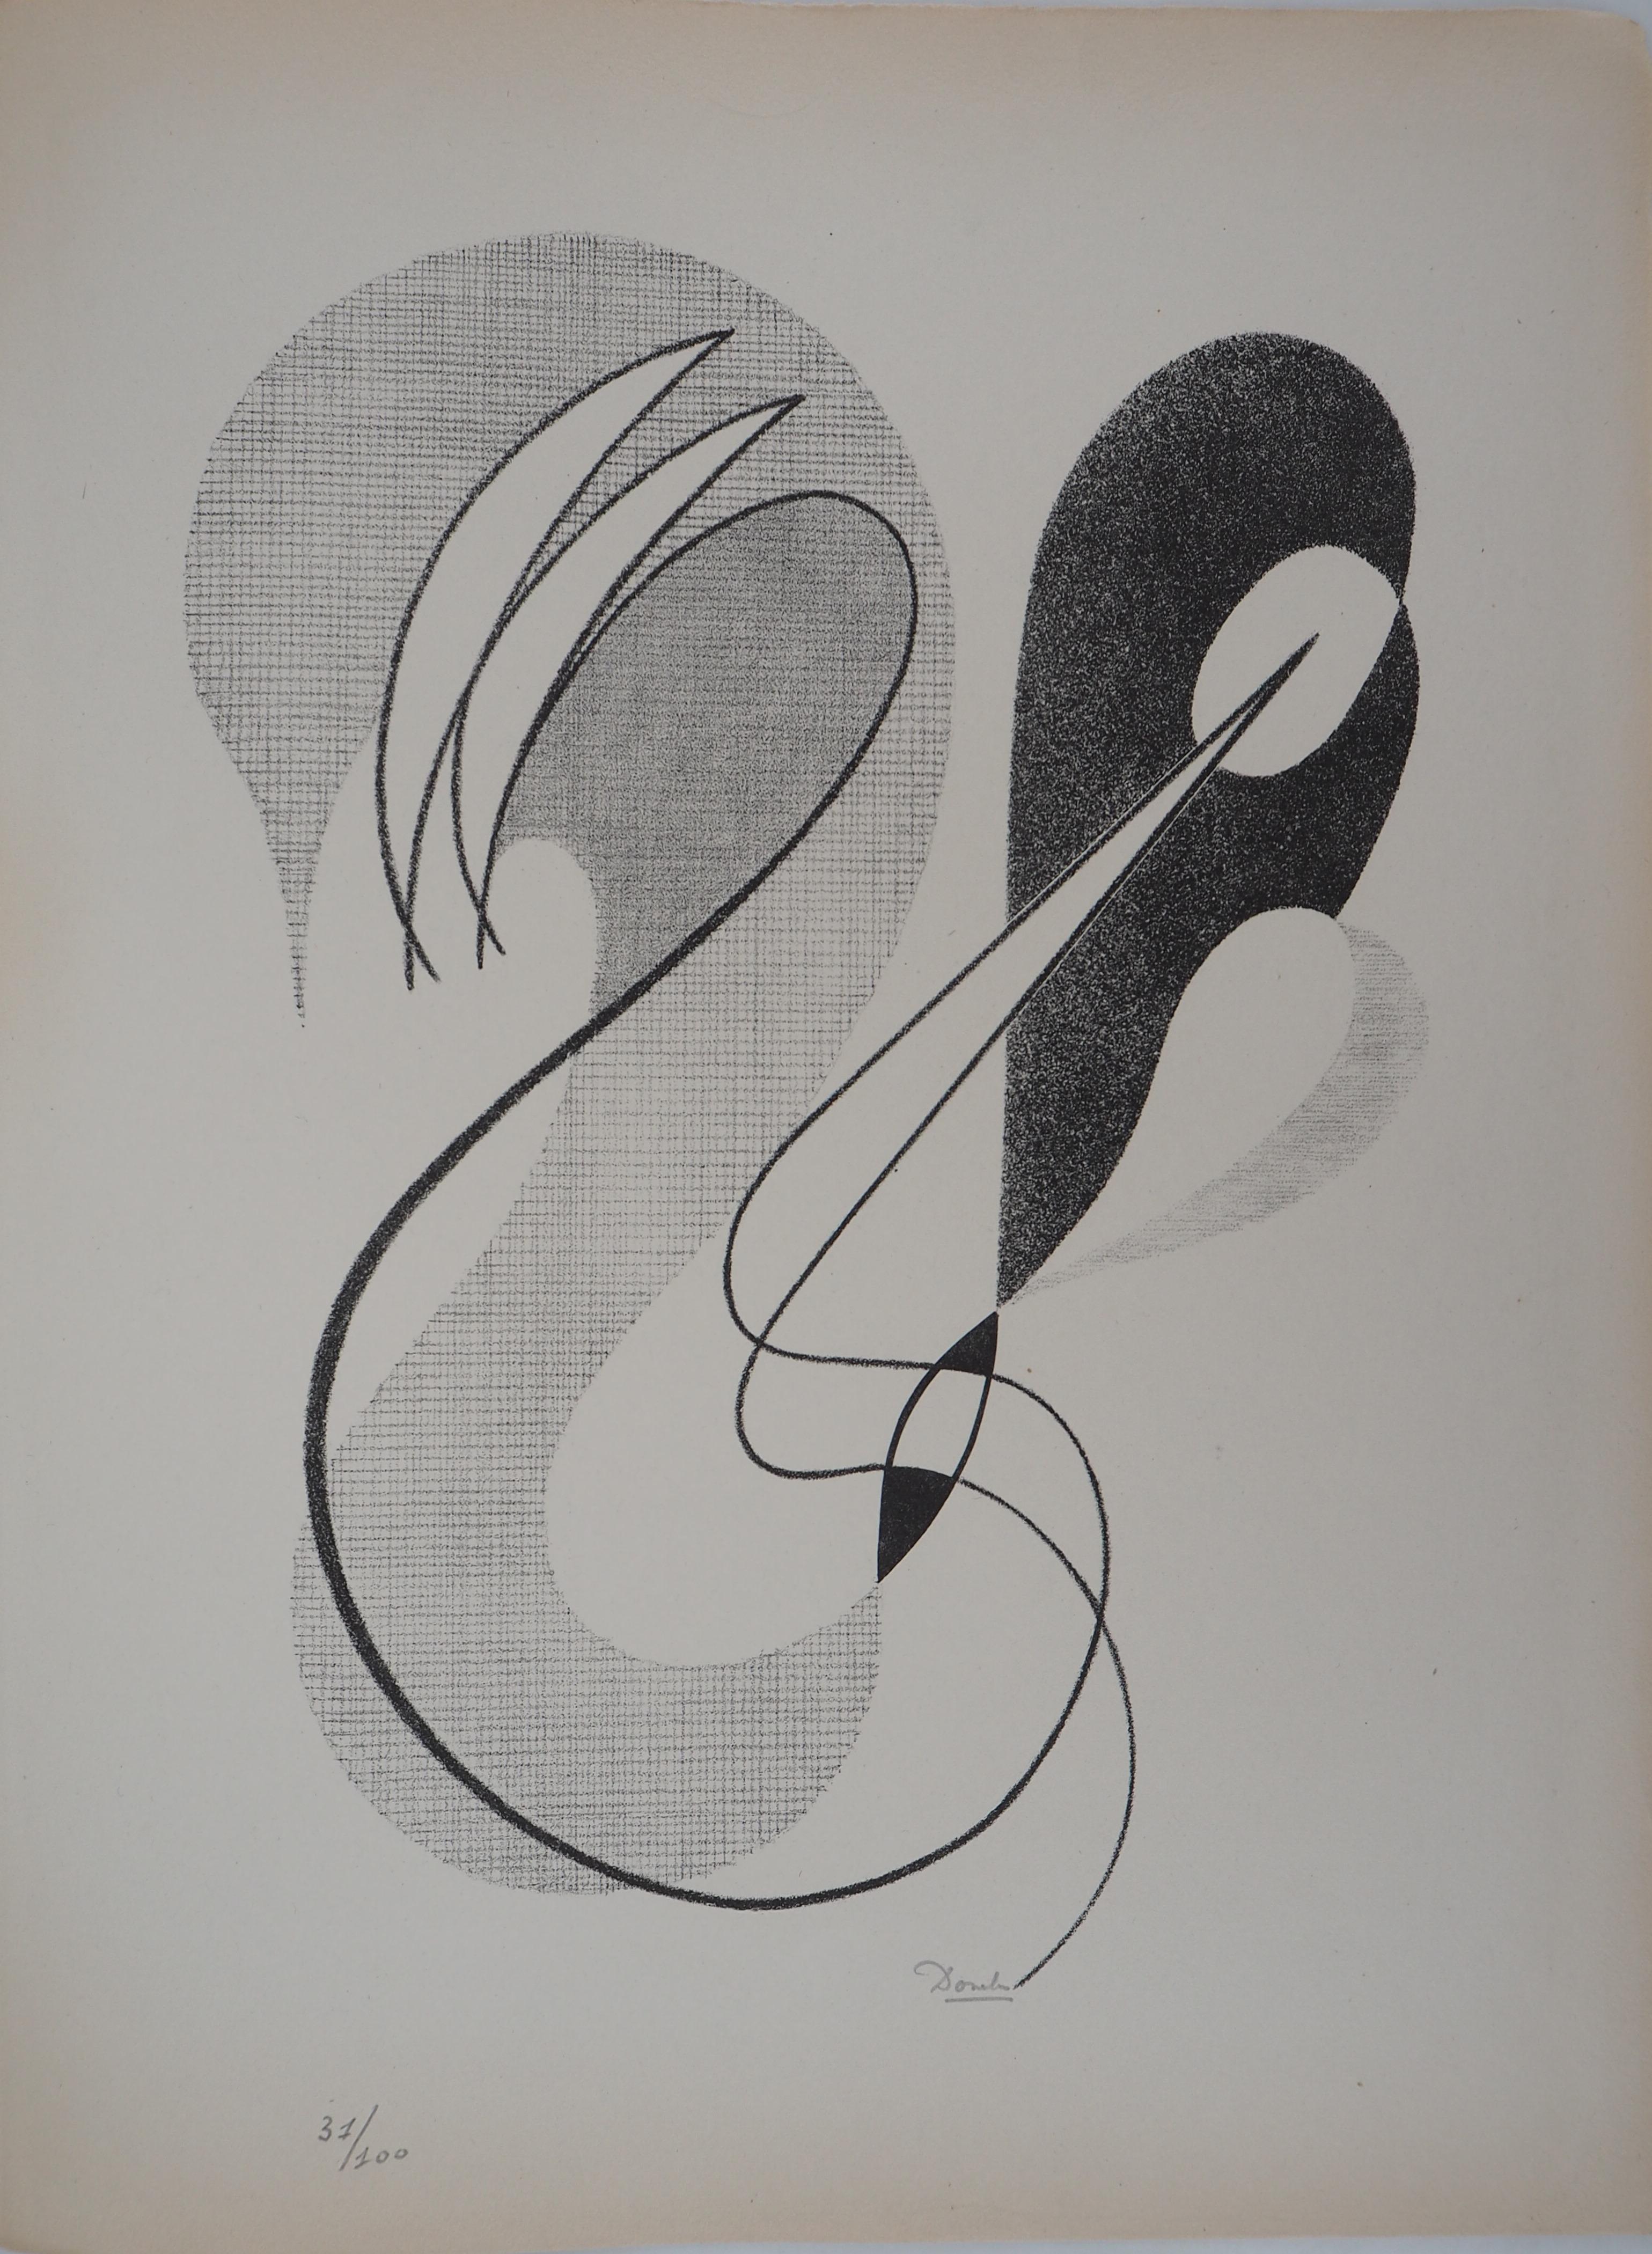 César Domela Abstract Print - Abstract Composition - Original lithograph, Handsigned and Numbered / 100, 1946